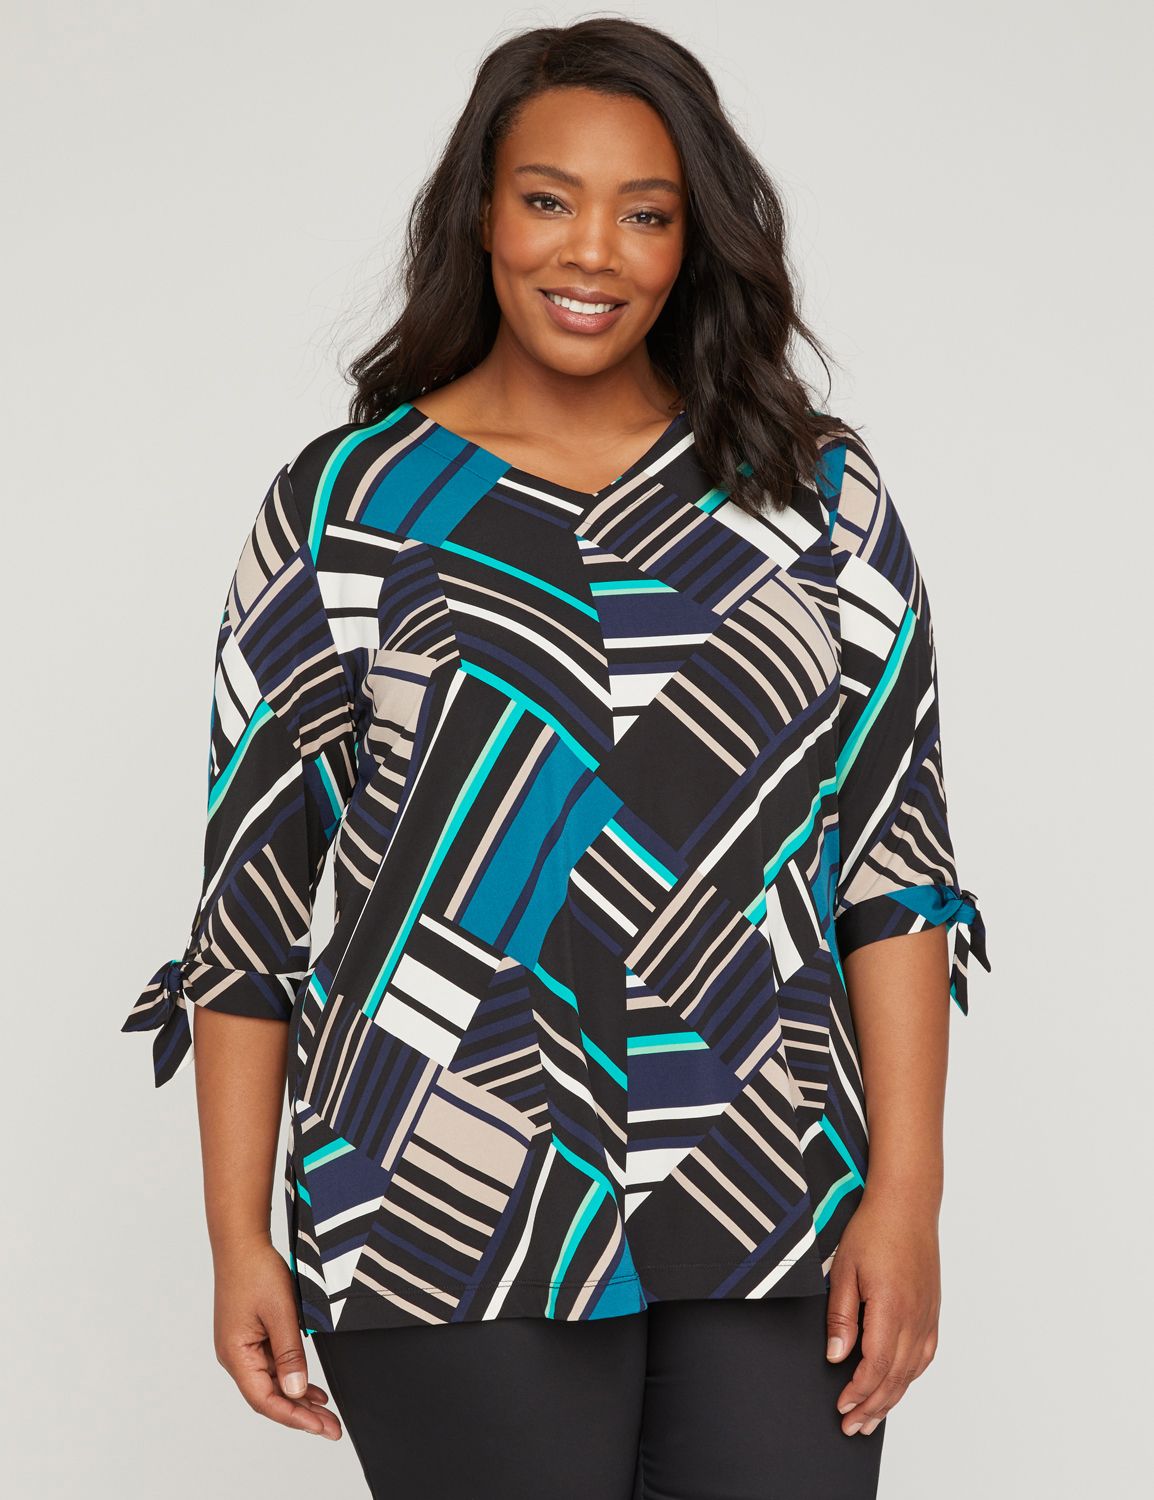 Lightweight and breezy, this tunic offers a perfect dose of casual comfort. V-neck. Three-quarter sleeves with tie design at cuffs. Split side hem. The longer tunic length pairs perfectly with our Capri Jegging. Item Number #314946, 96% Polyester/4% Spandex, Machine Wash, Imported Plus Size Top, Length: 31.25", Petite Length: 29.25" , Plus Sizes 0X-5X, Petite Plus Sizes 0XWP-3XWP, Catherines Plus Sizes